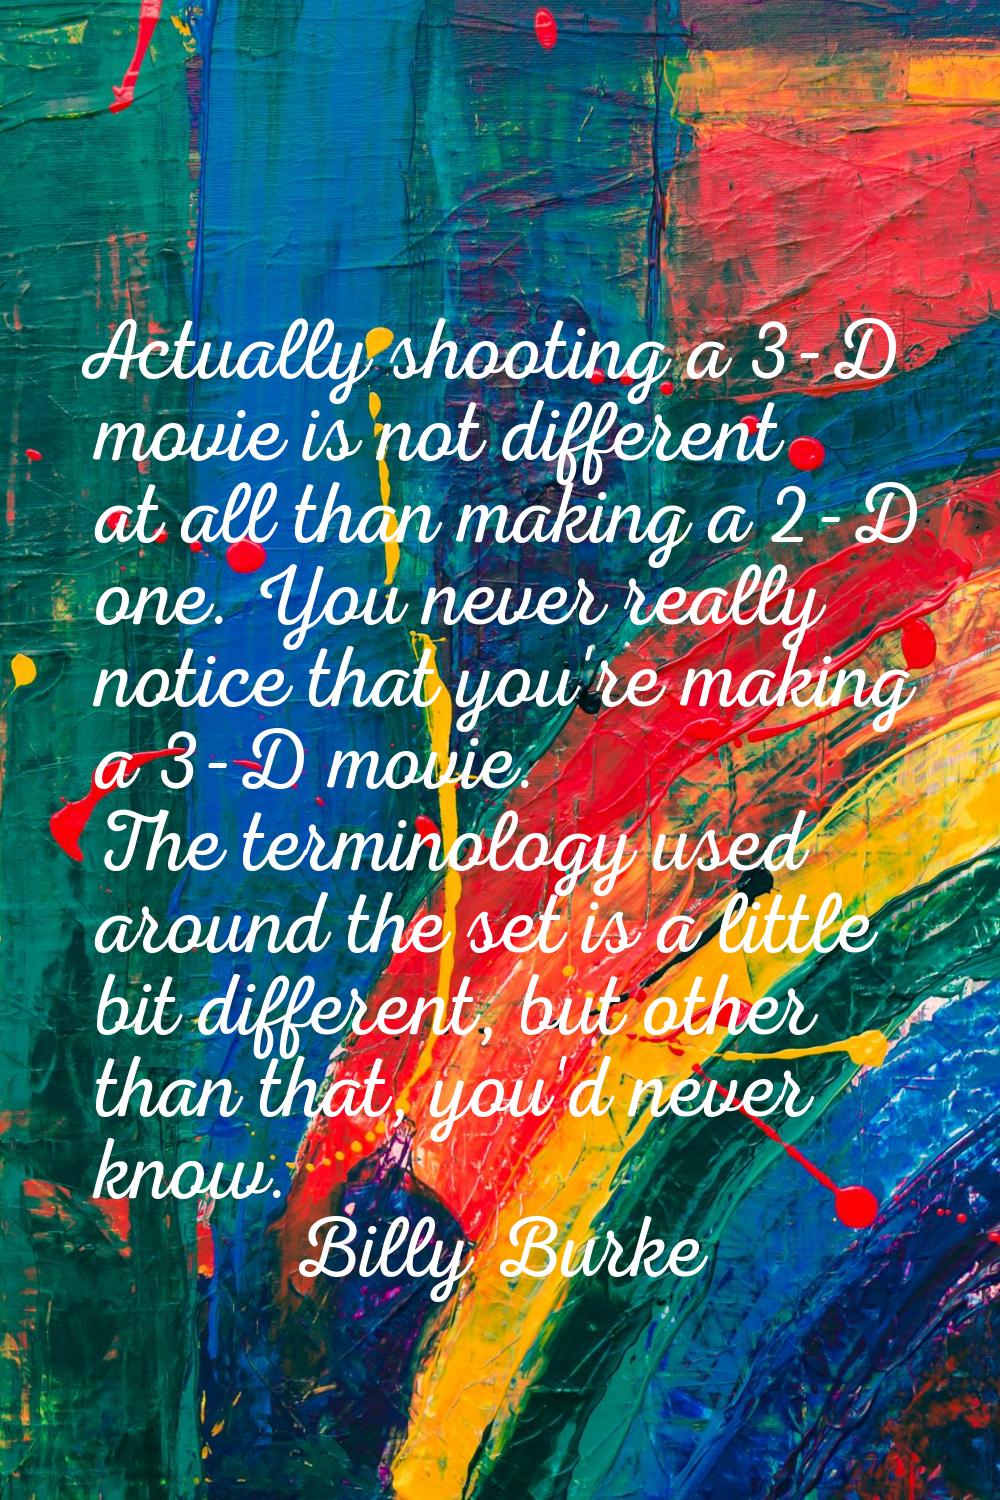 Actually shooting a 3-D movie is not different at all than making a 2-D one. You never really notic